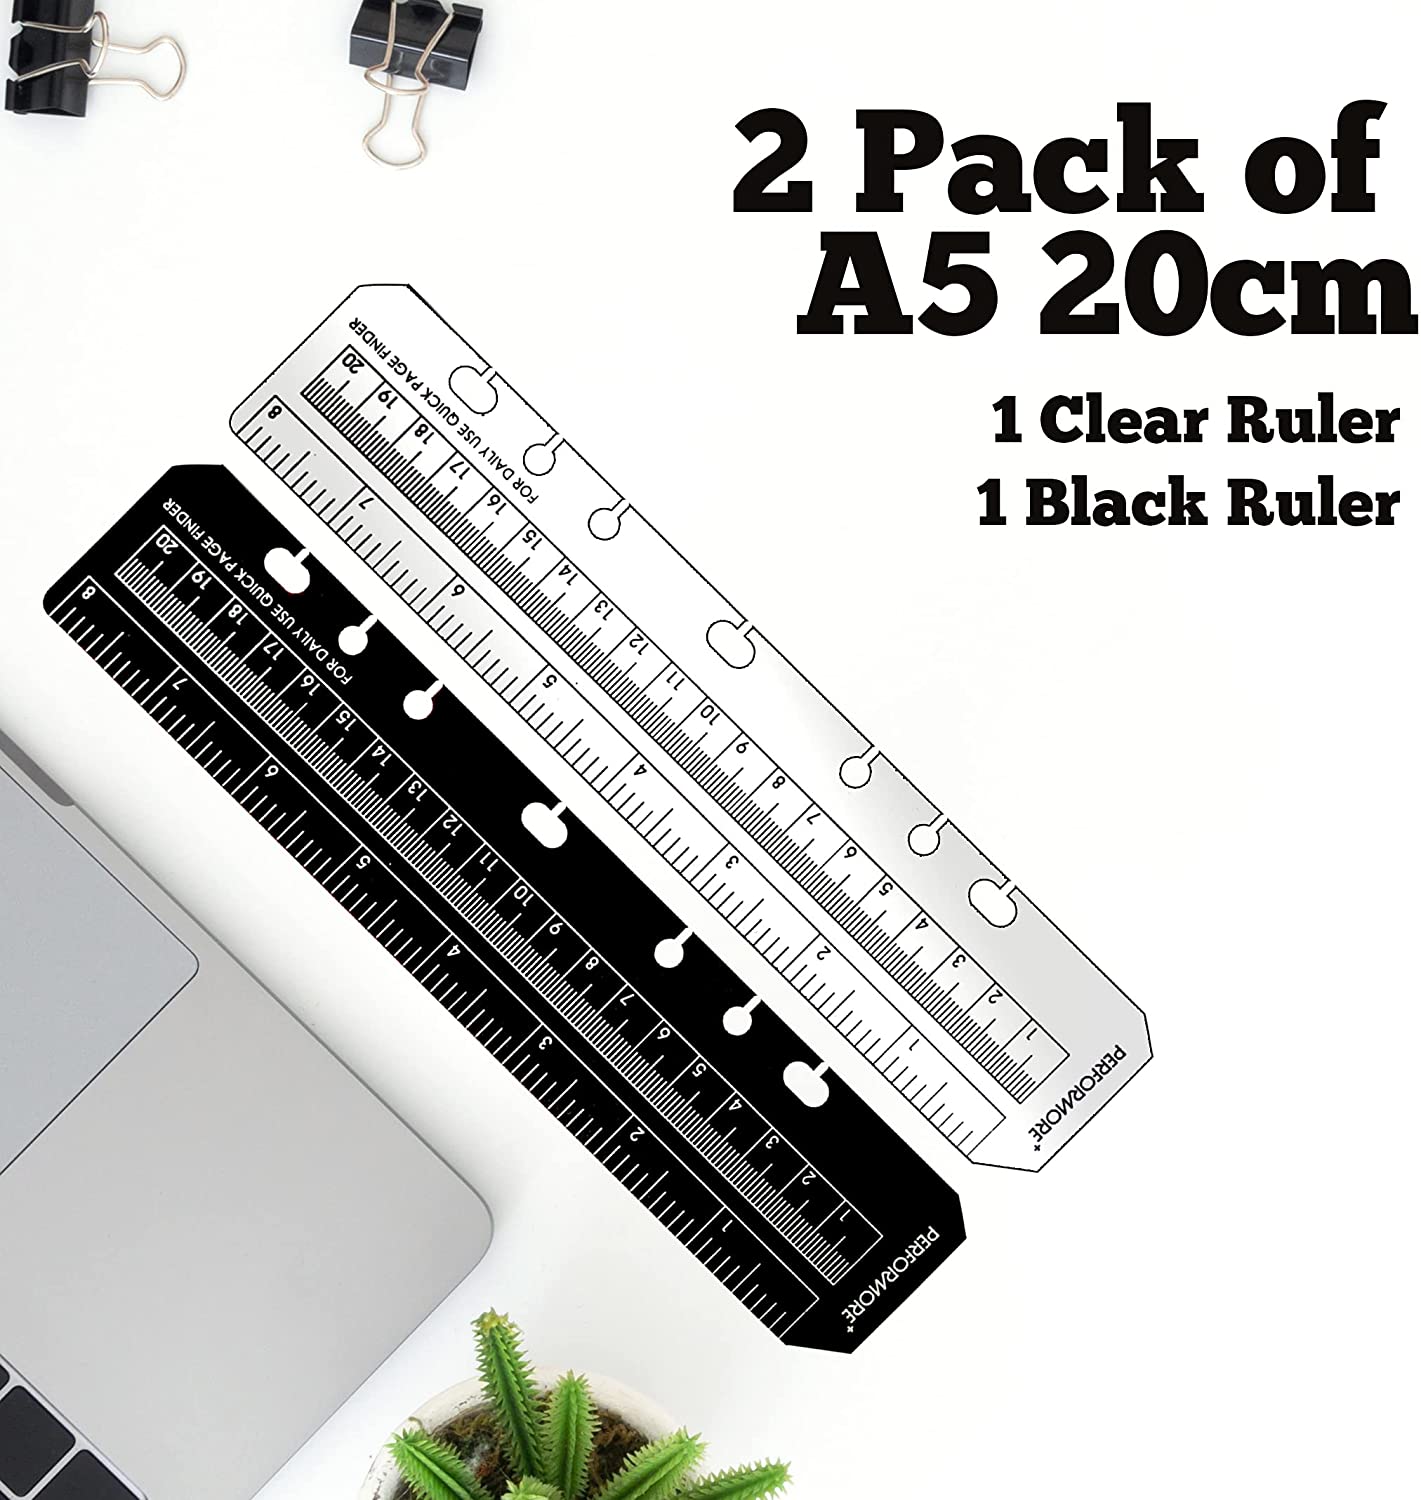 PERFORMORE 2 Pack of Snap-in 8 Bookmark Rulers, Black and Clear Plastic  Page Marker Divider Pagefinder Measuring Today Ruler for A5 Size Binder  Notebook Planner with Up to 7-Hole Ring Configuration 